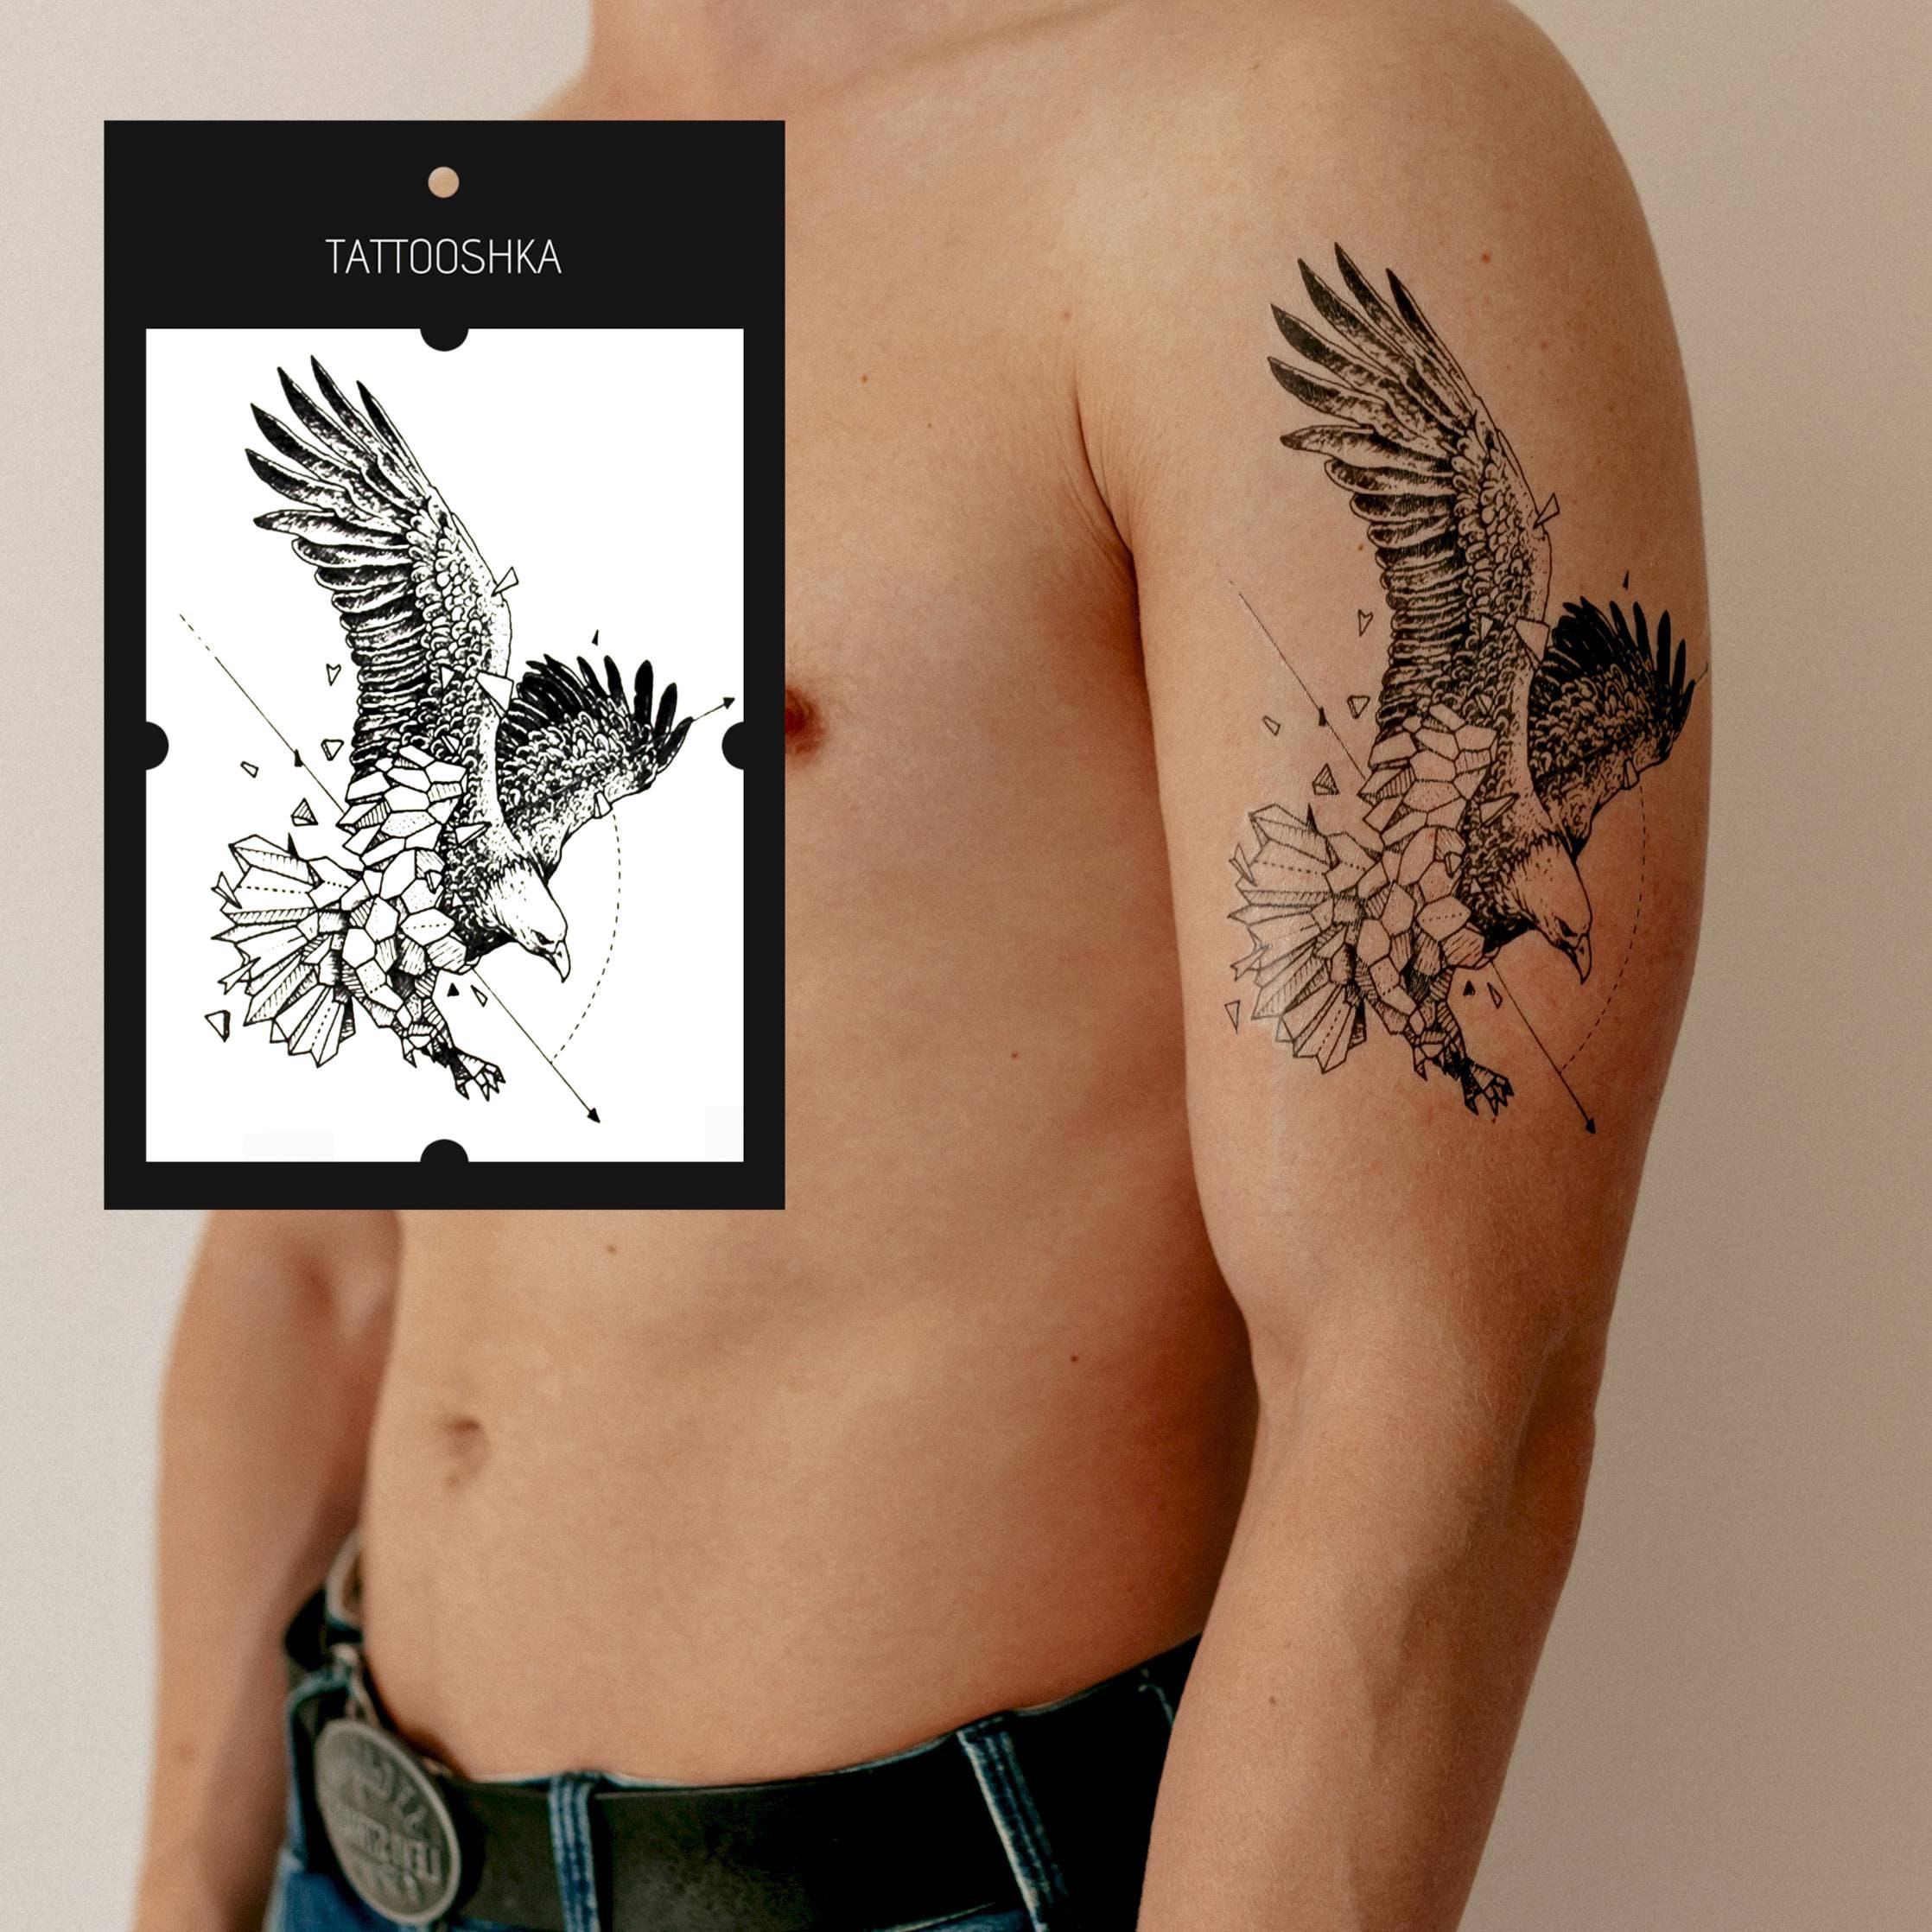 Woman In Eagle Tattoo In Back Wearing Black Bra Picture Image 109922394